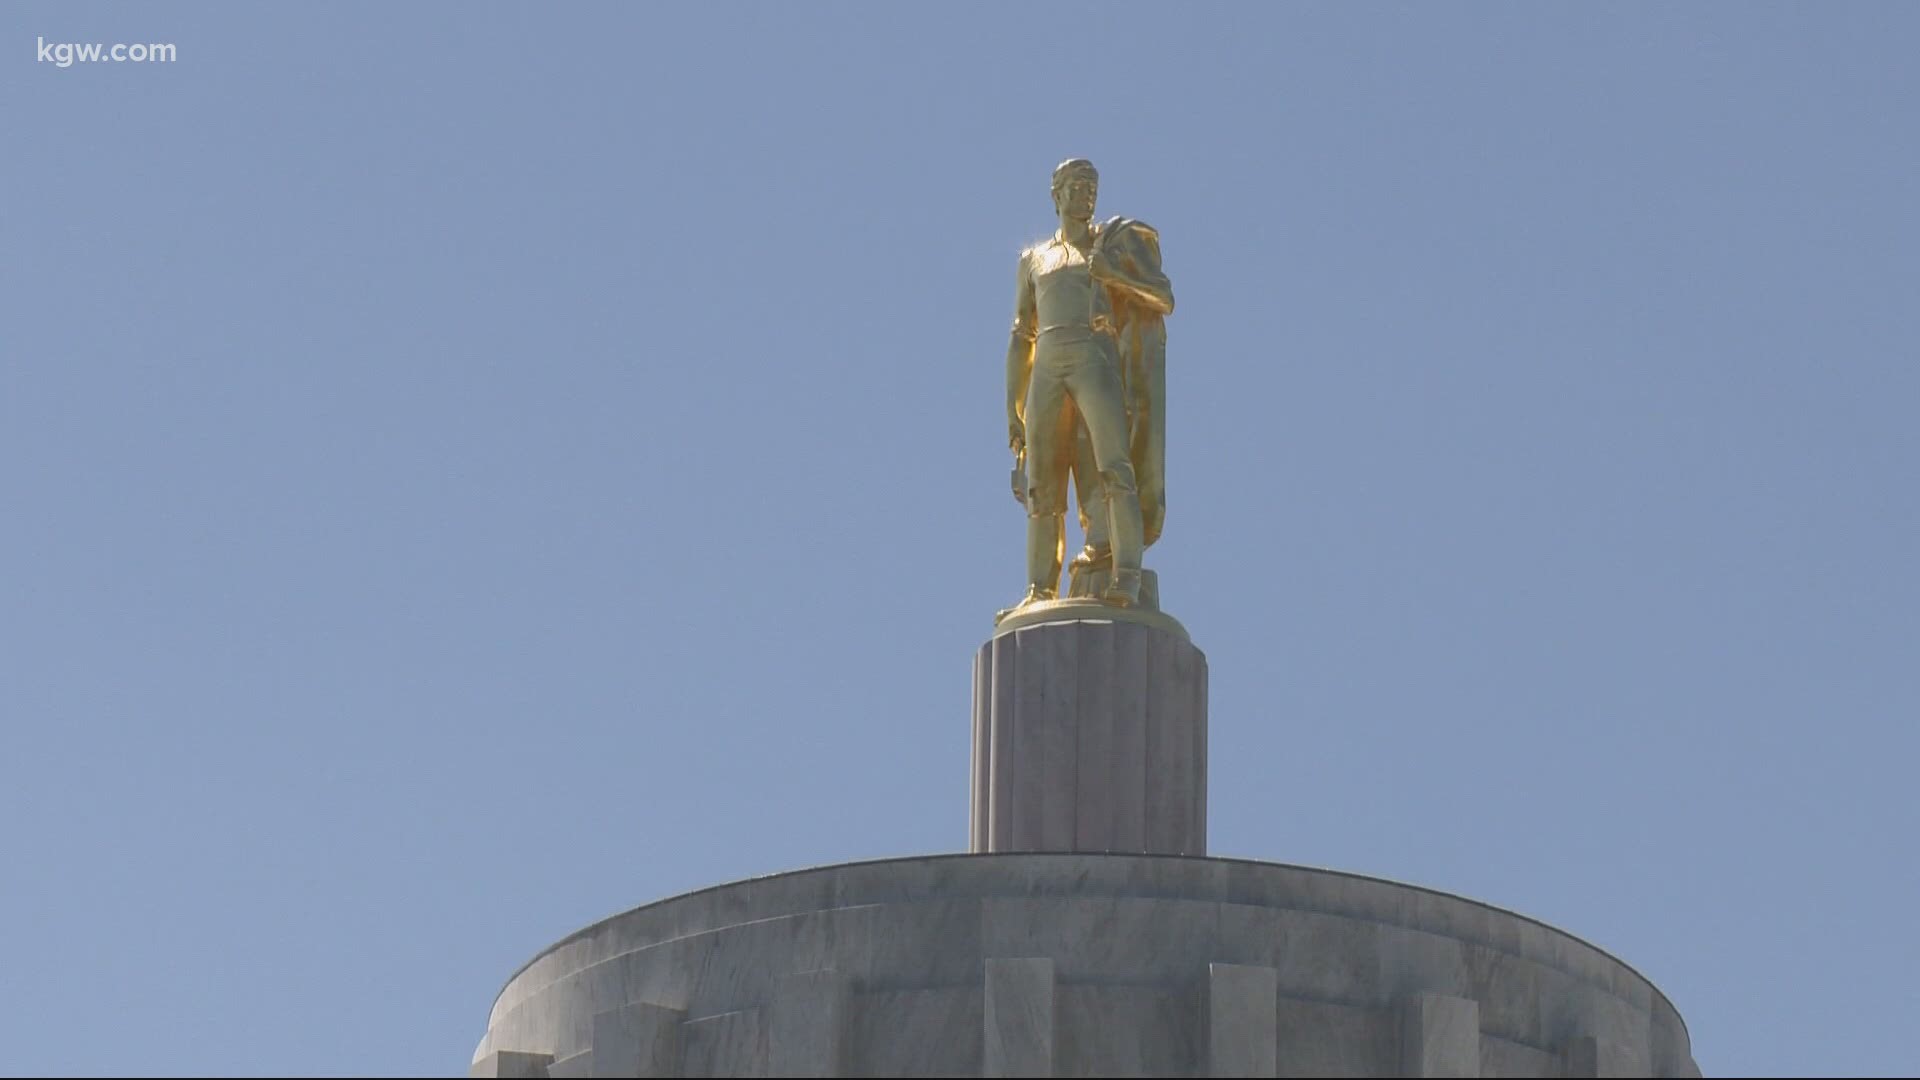 He's called the Oregon Pioneer and he's supposed to be a "symbol of the independent spirit of Oregonians," according to the legislature's website.